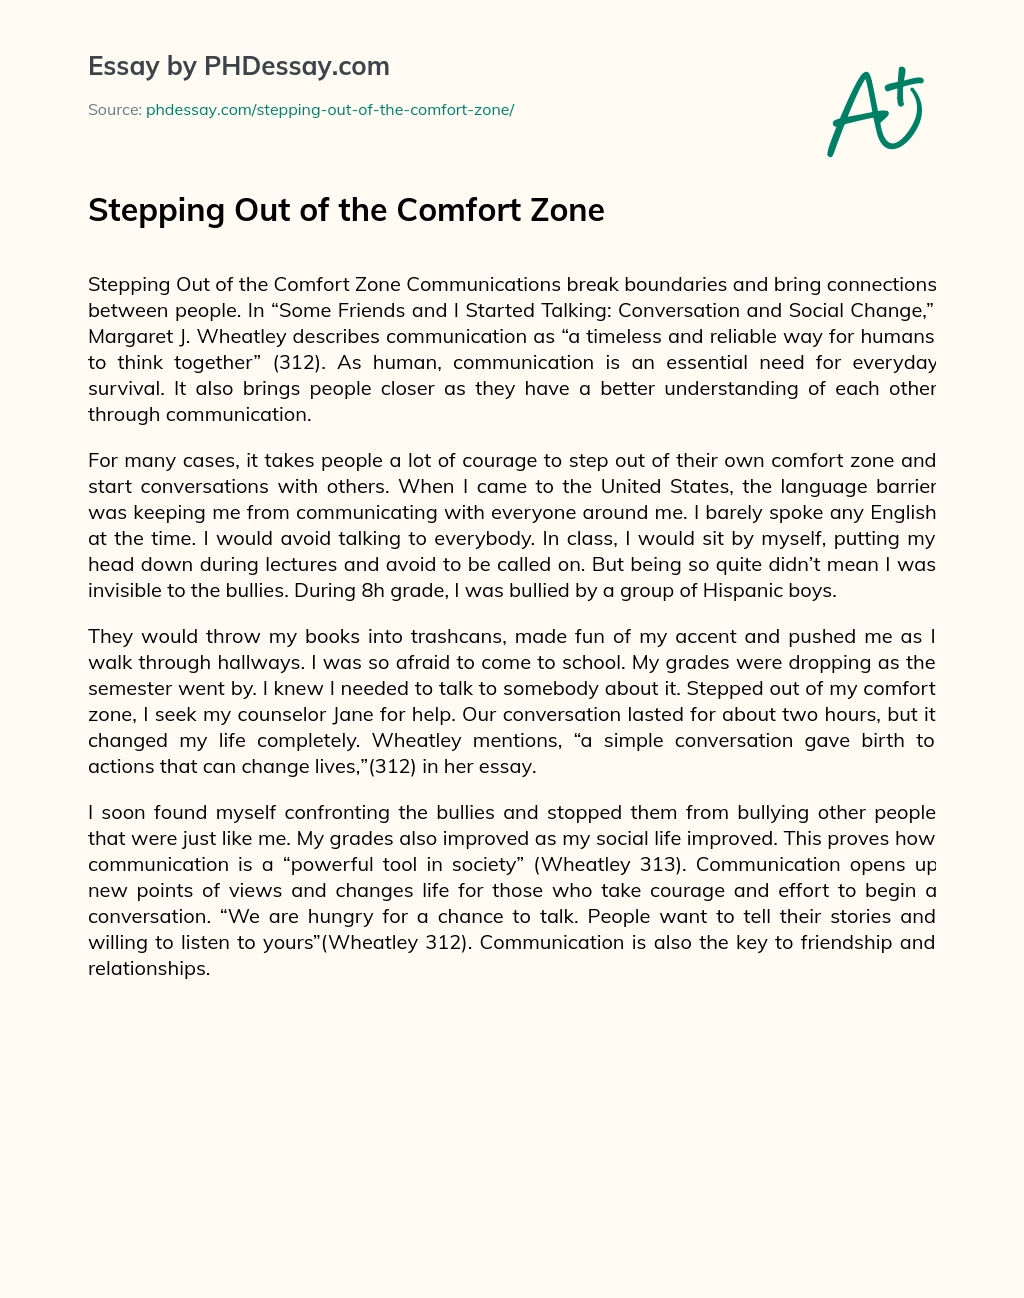 Stepping Out of the Comfort Zone essay